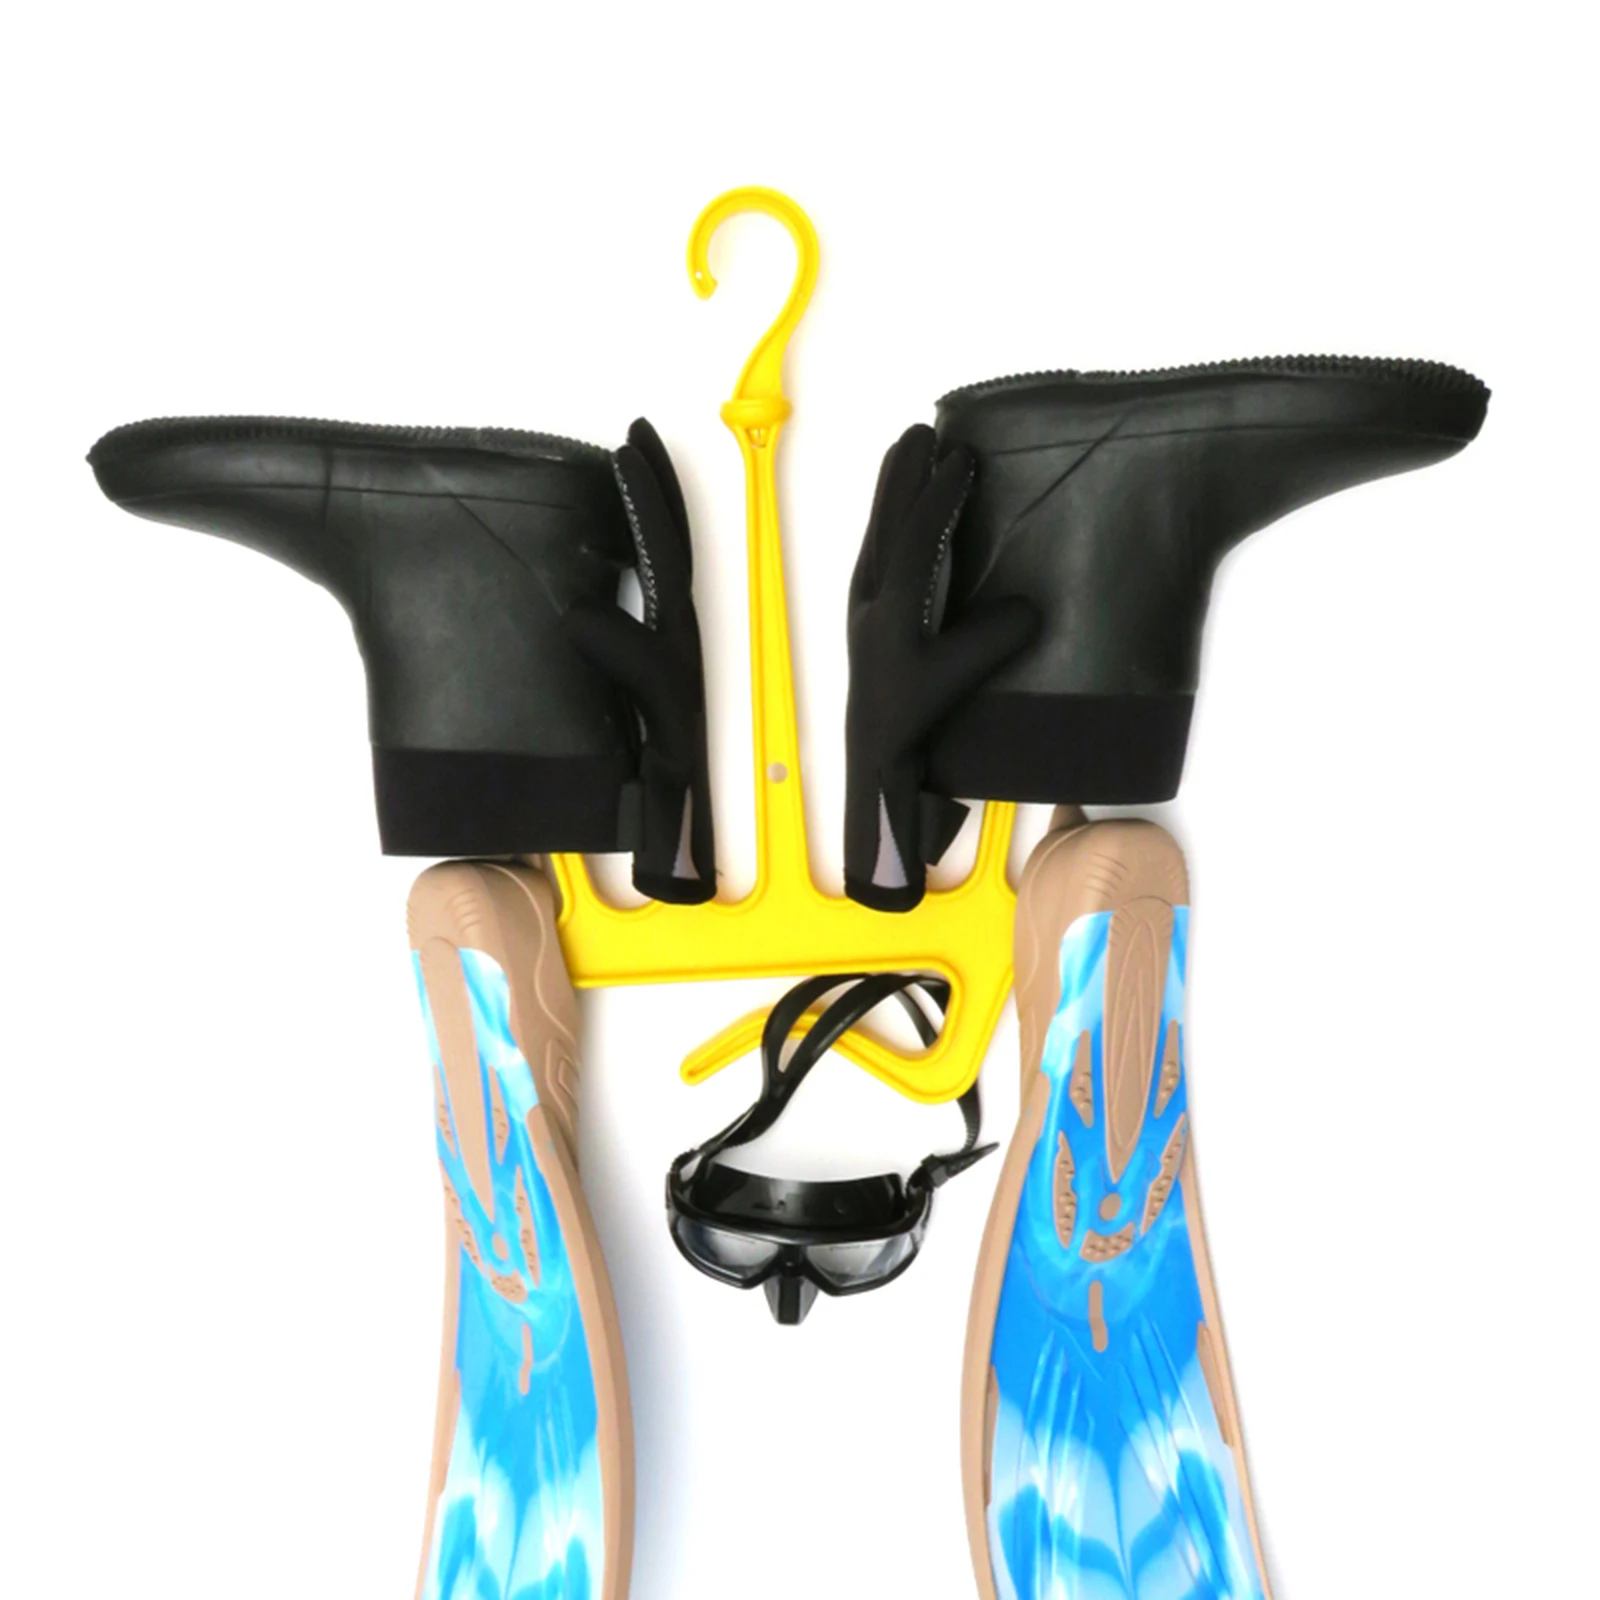 Plastic Diving Hanger Dive Boots Wetsuit Surfing Gear Hangers Fast Drying Drain